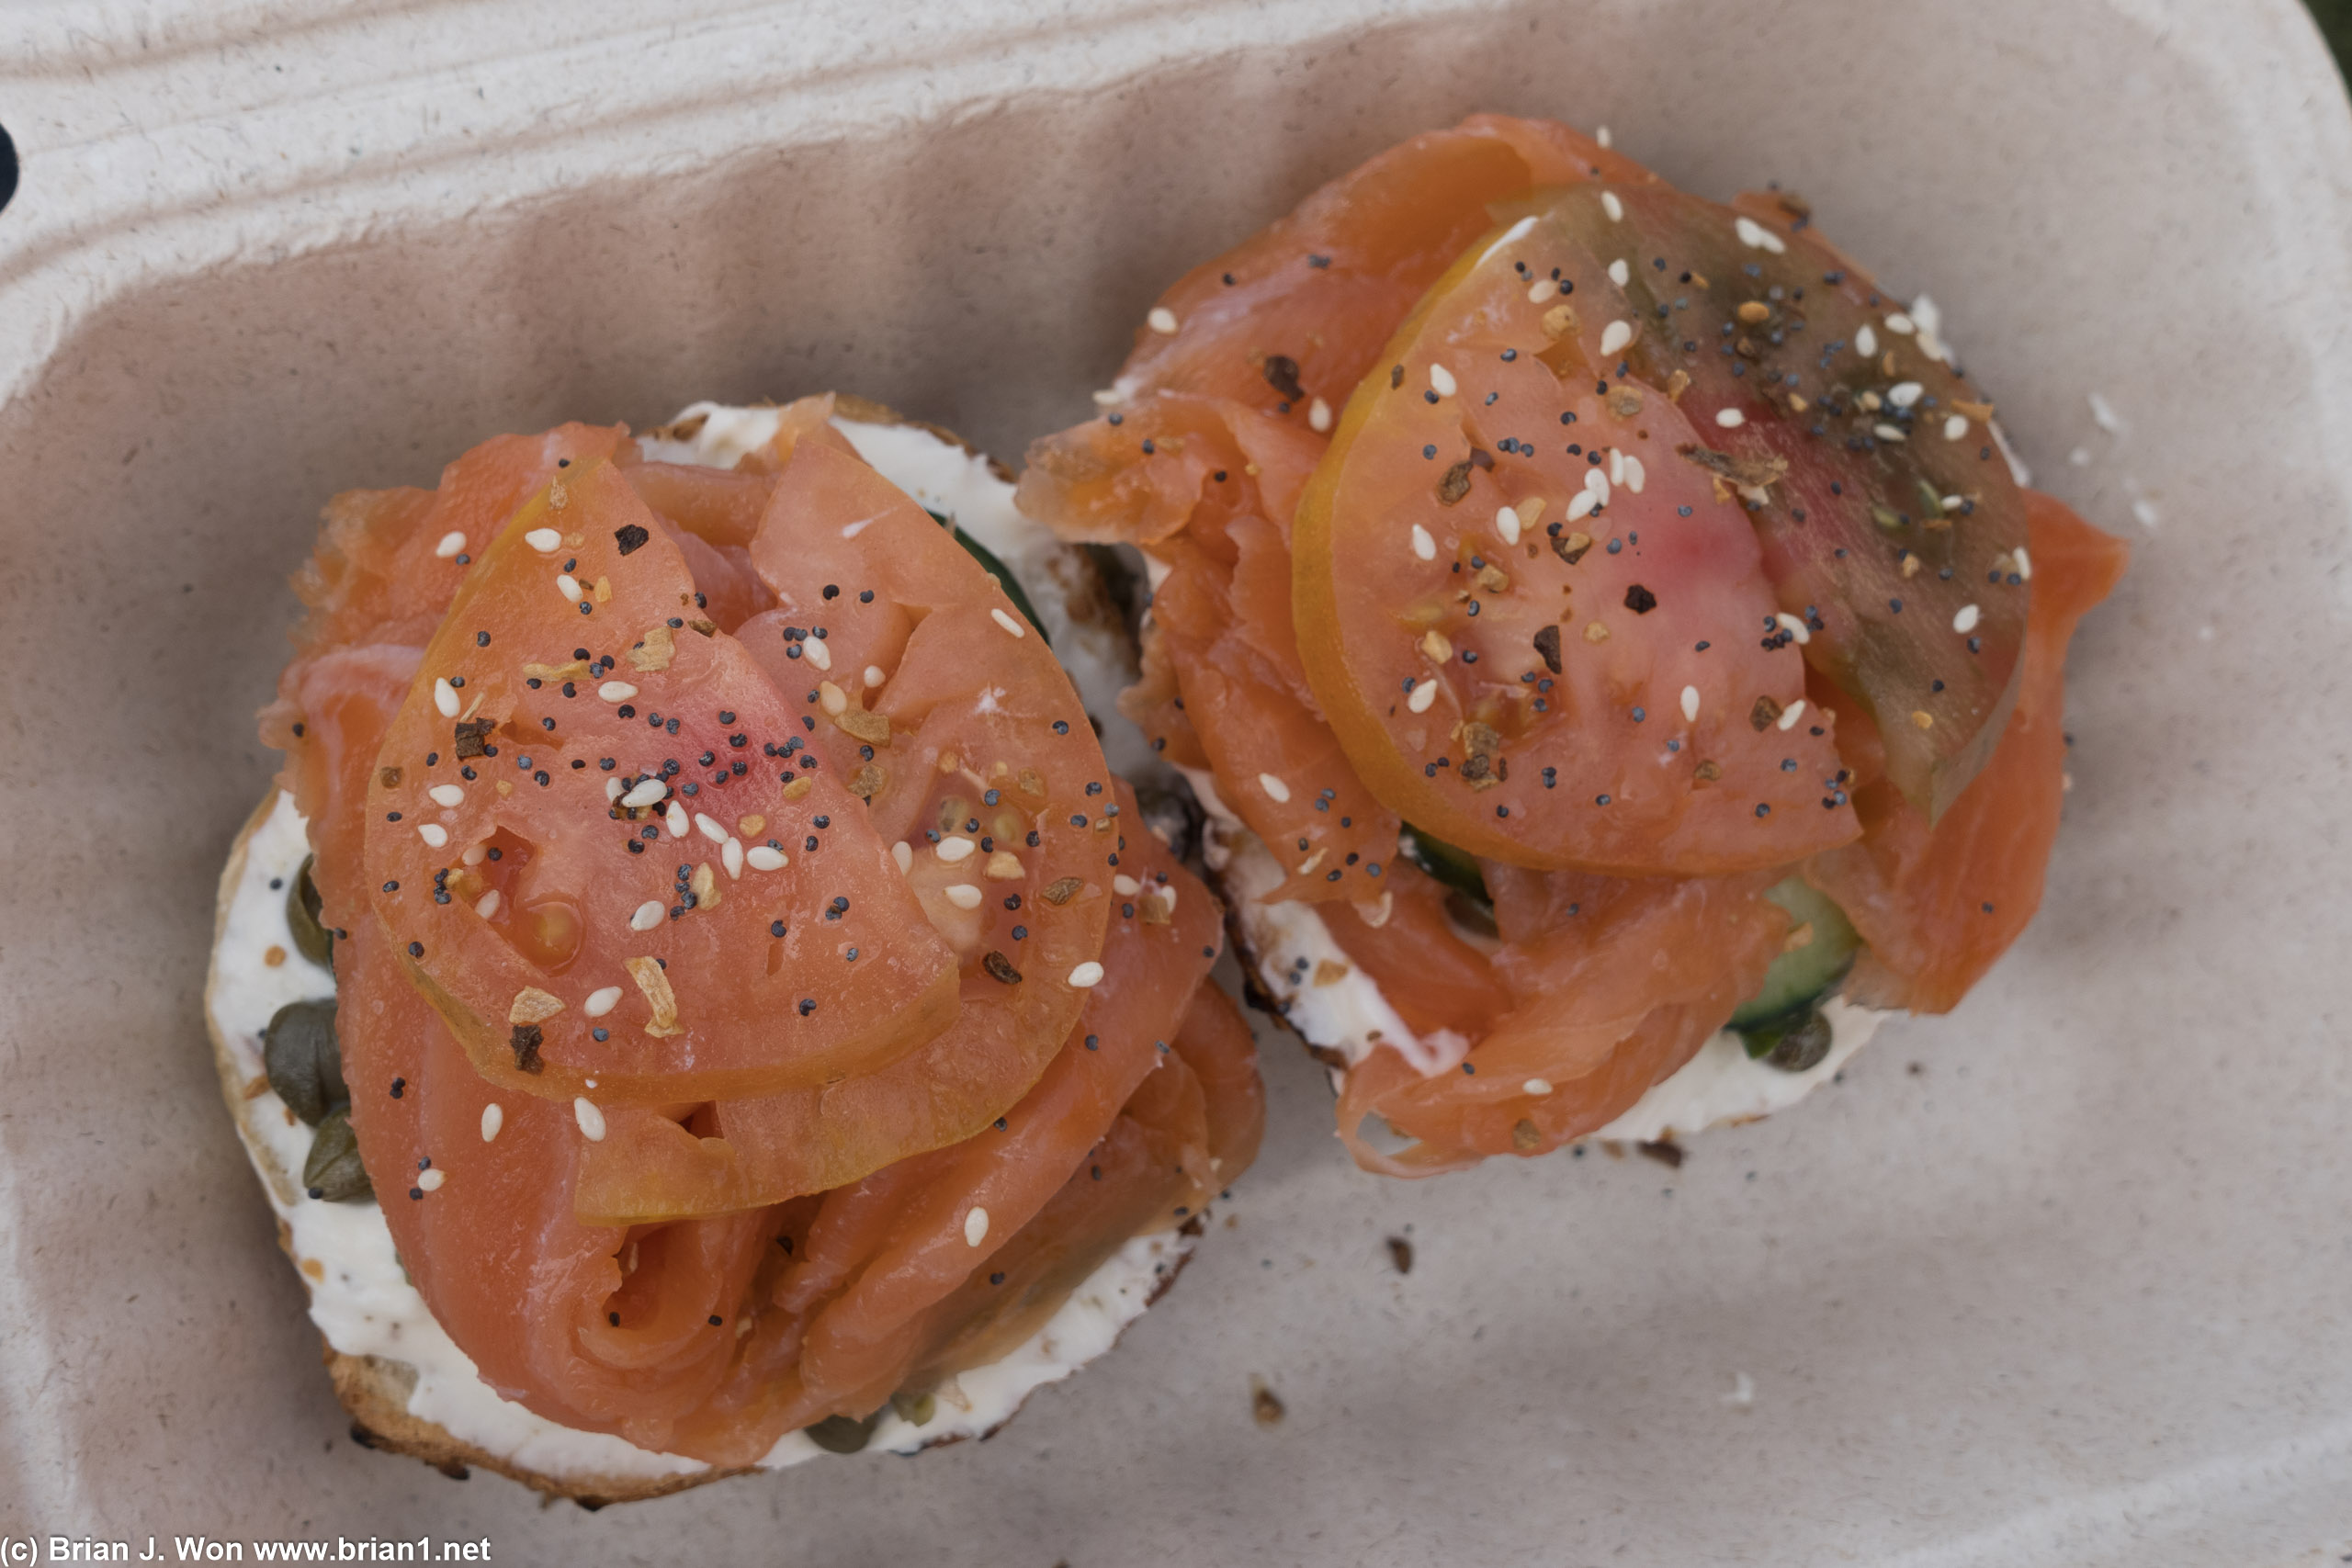 Pricey and slow to come out but it was piled high with lox.